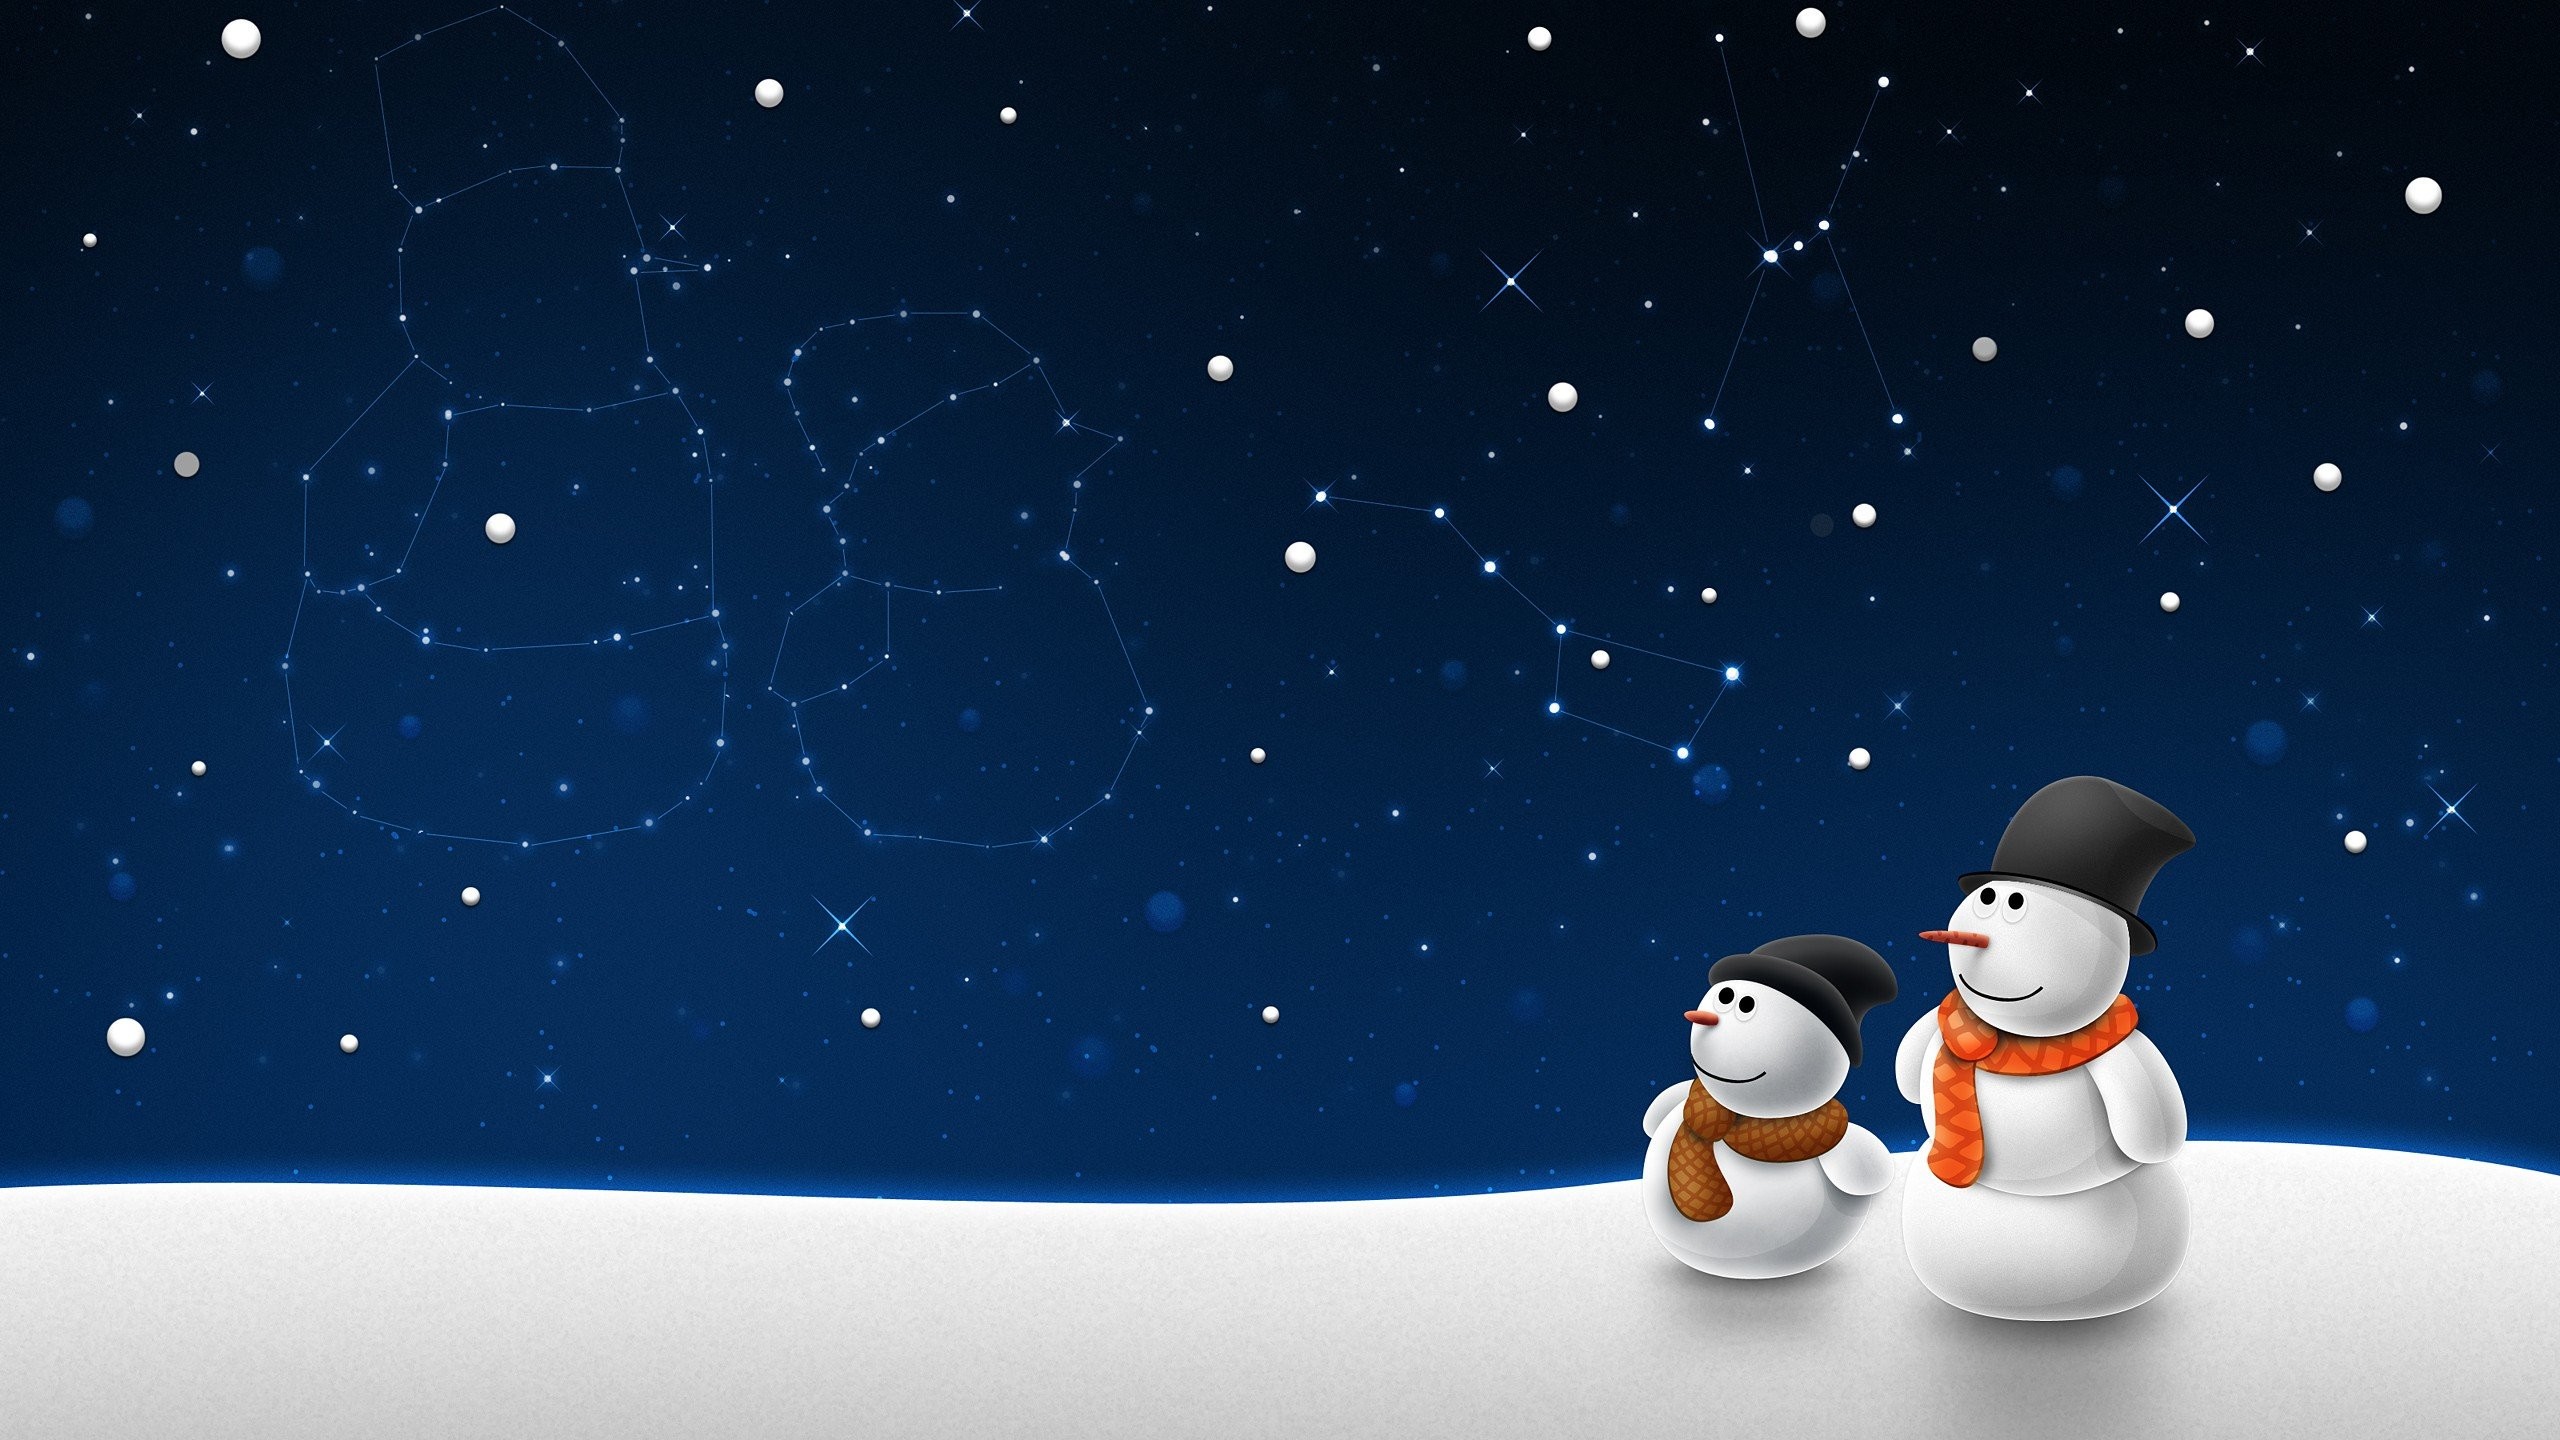 2560x1440 christmas background theme ; wallpaper-constellation-snowman-father- background-winter-